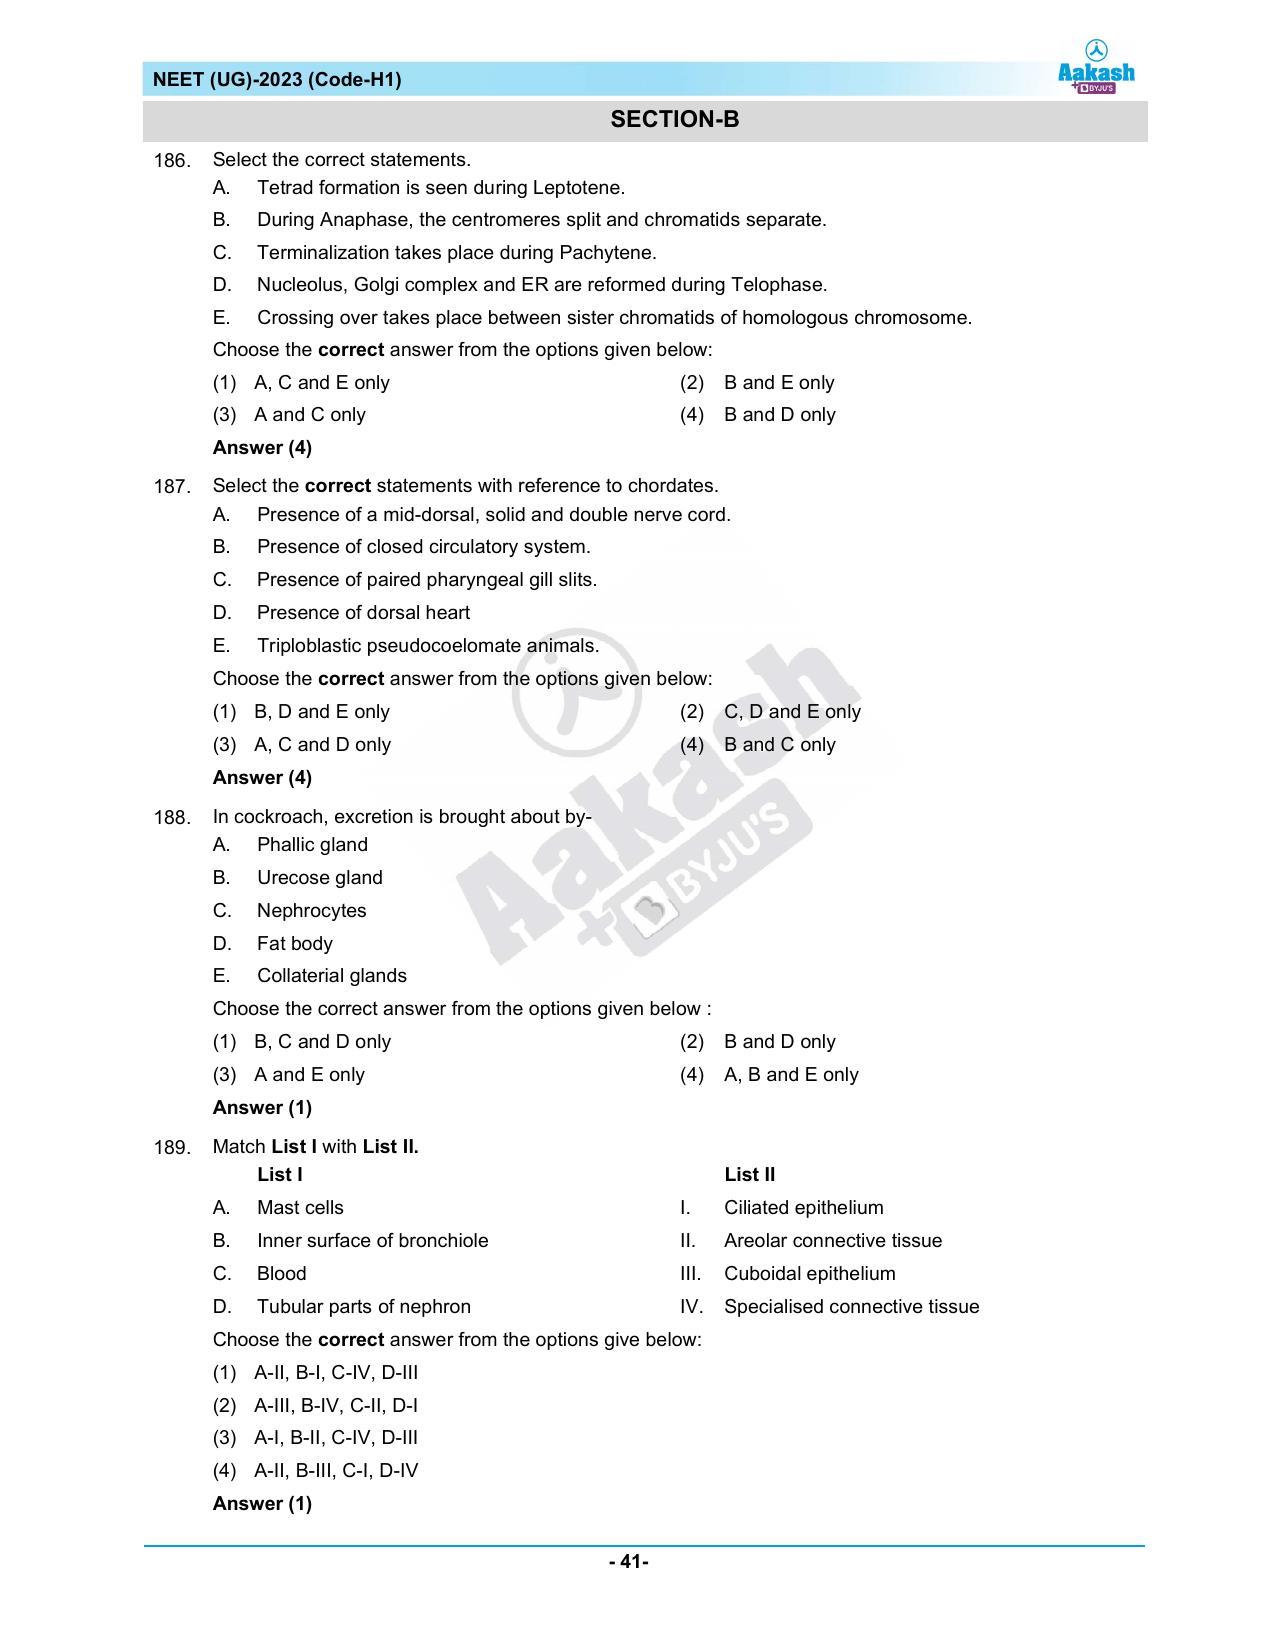 NEET 2023 Question Paper H1 - Page 41